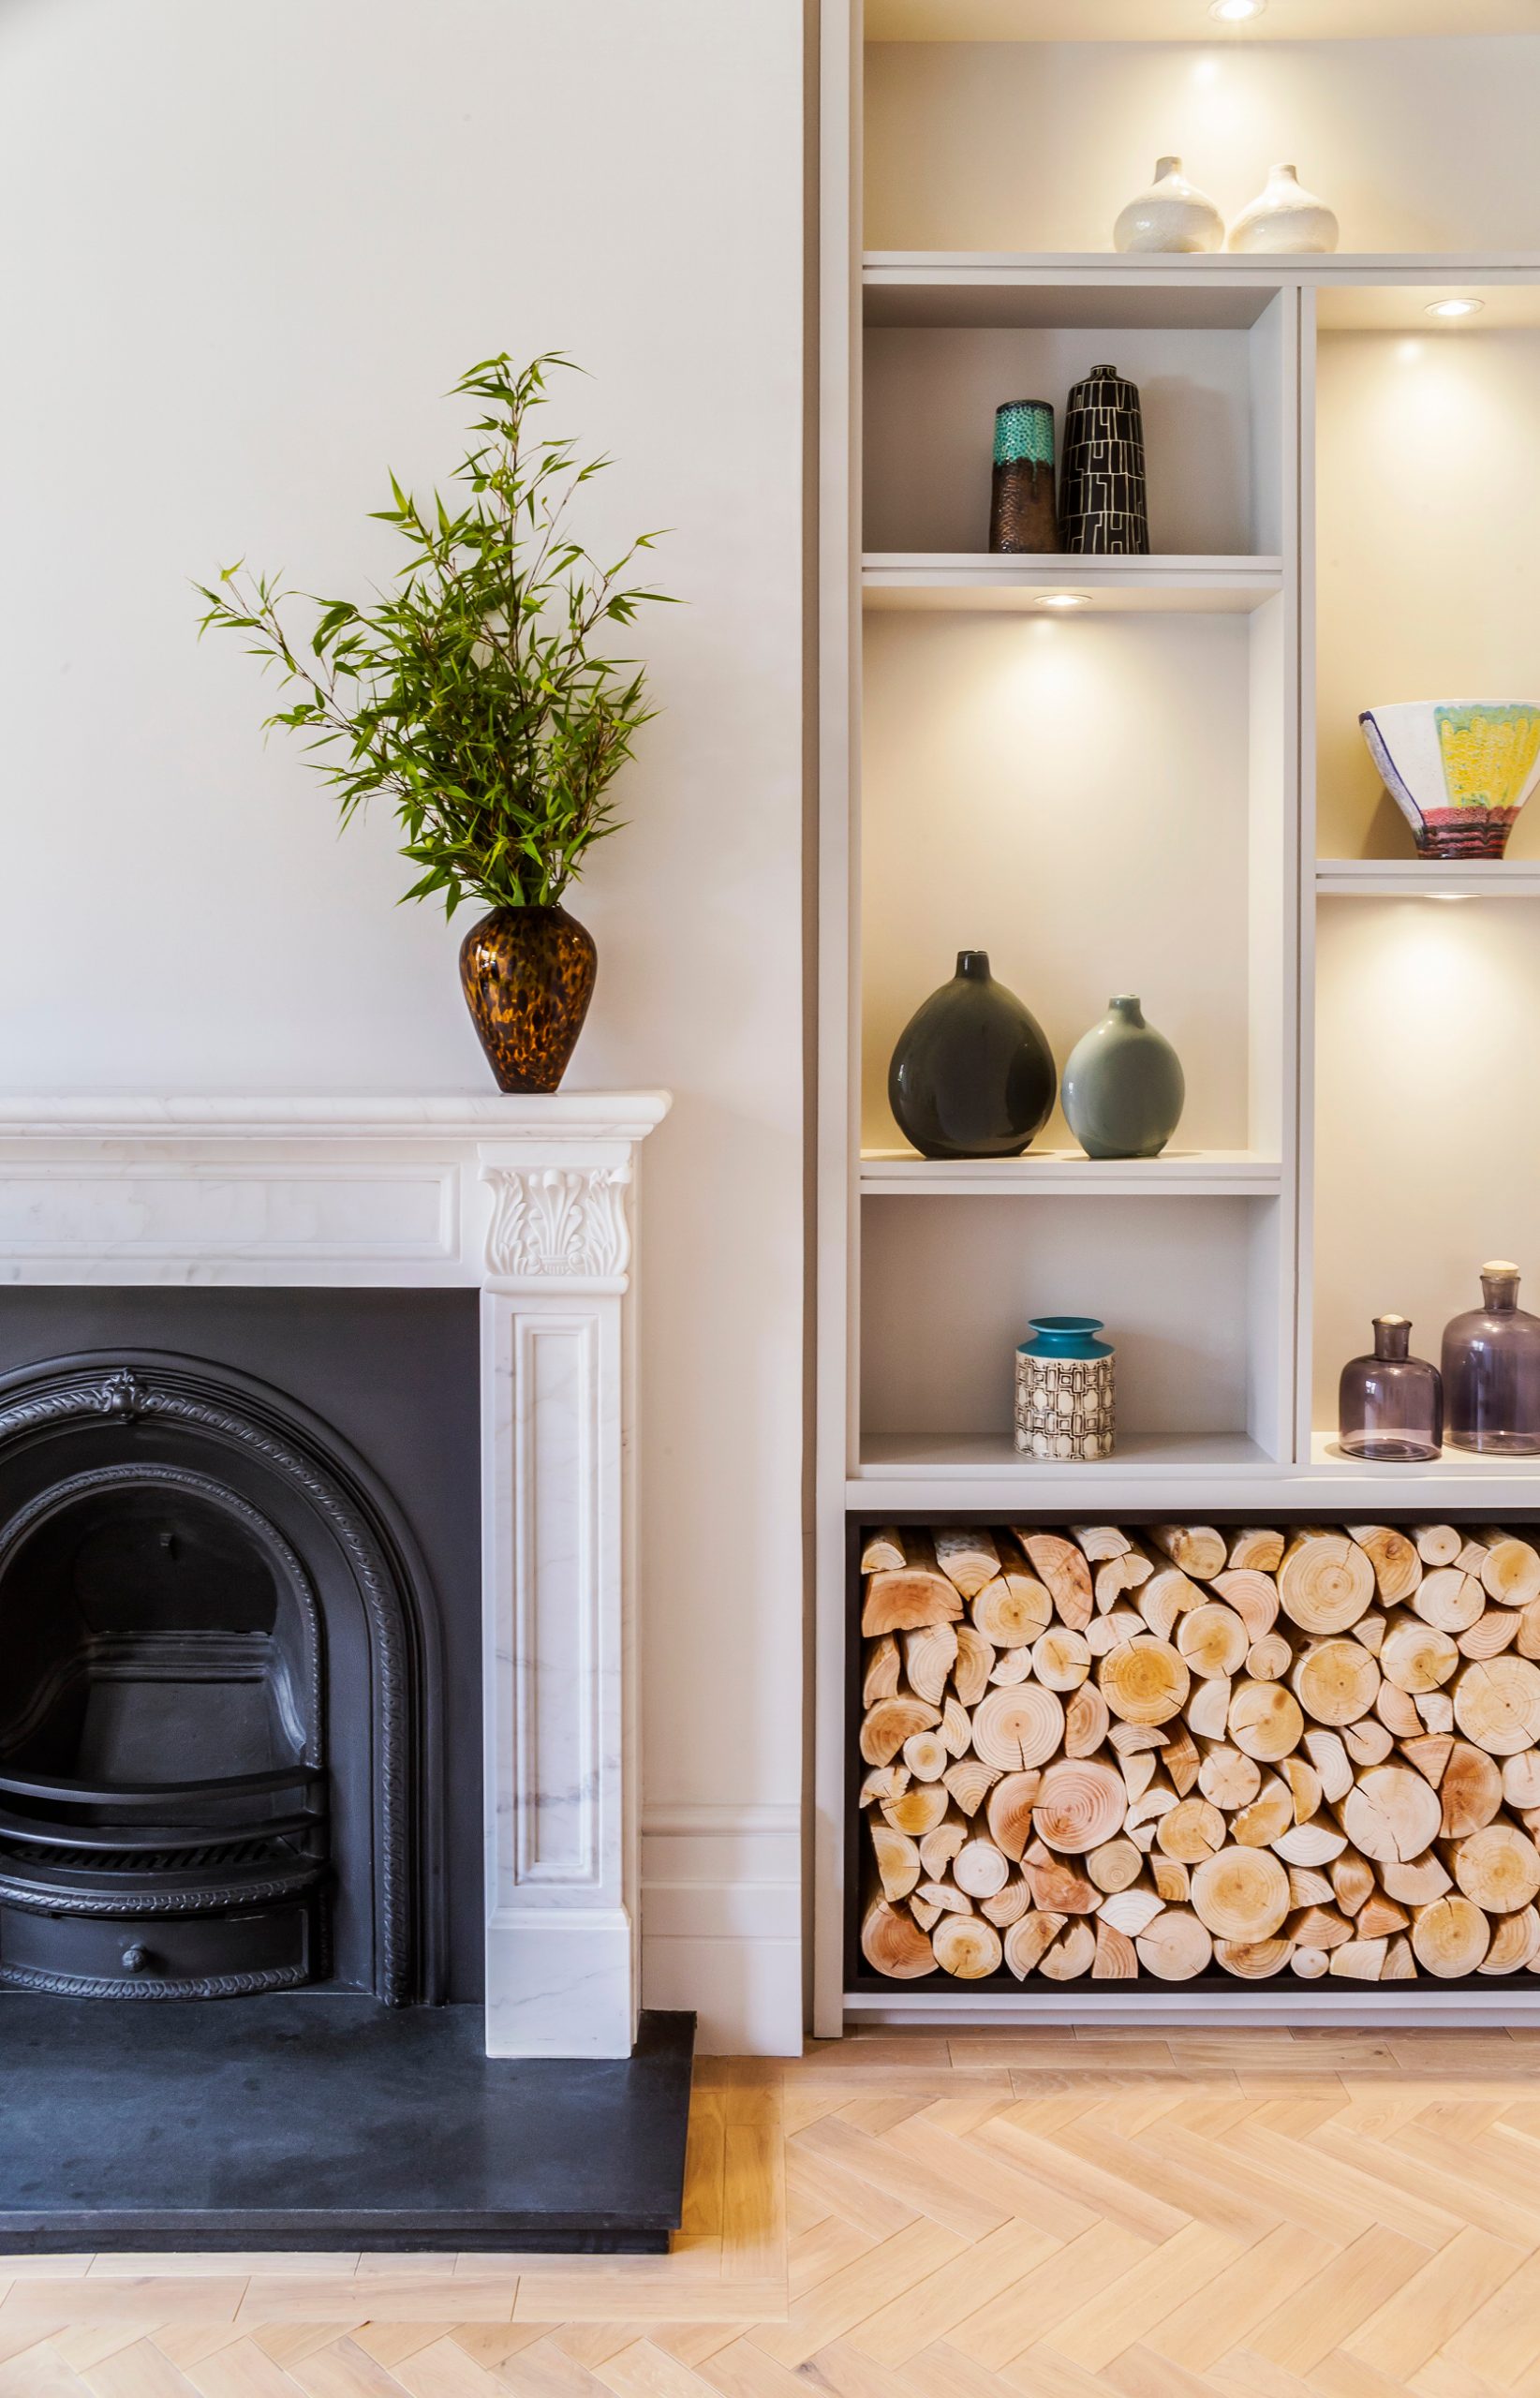 Edwardian Townhouse - living room fireplace and bespoke joinery detail